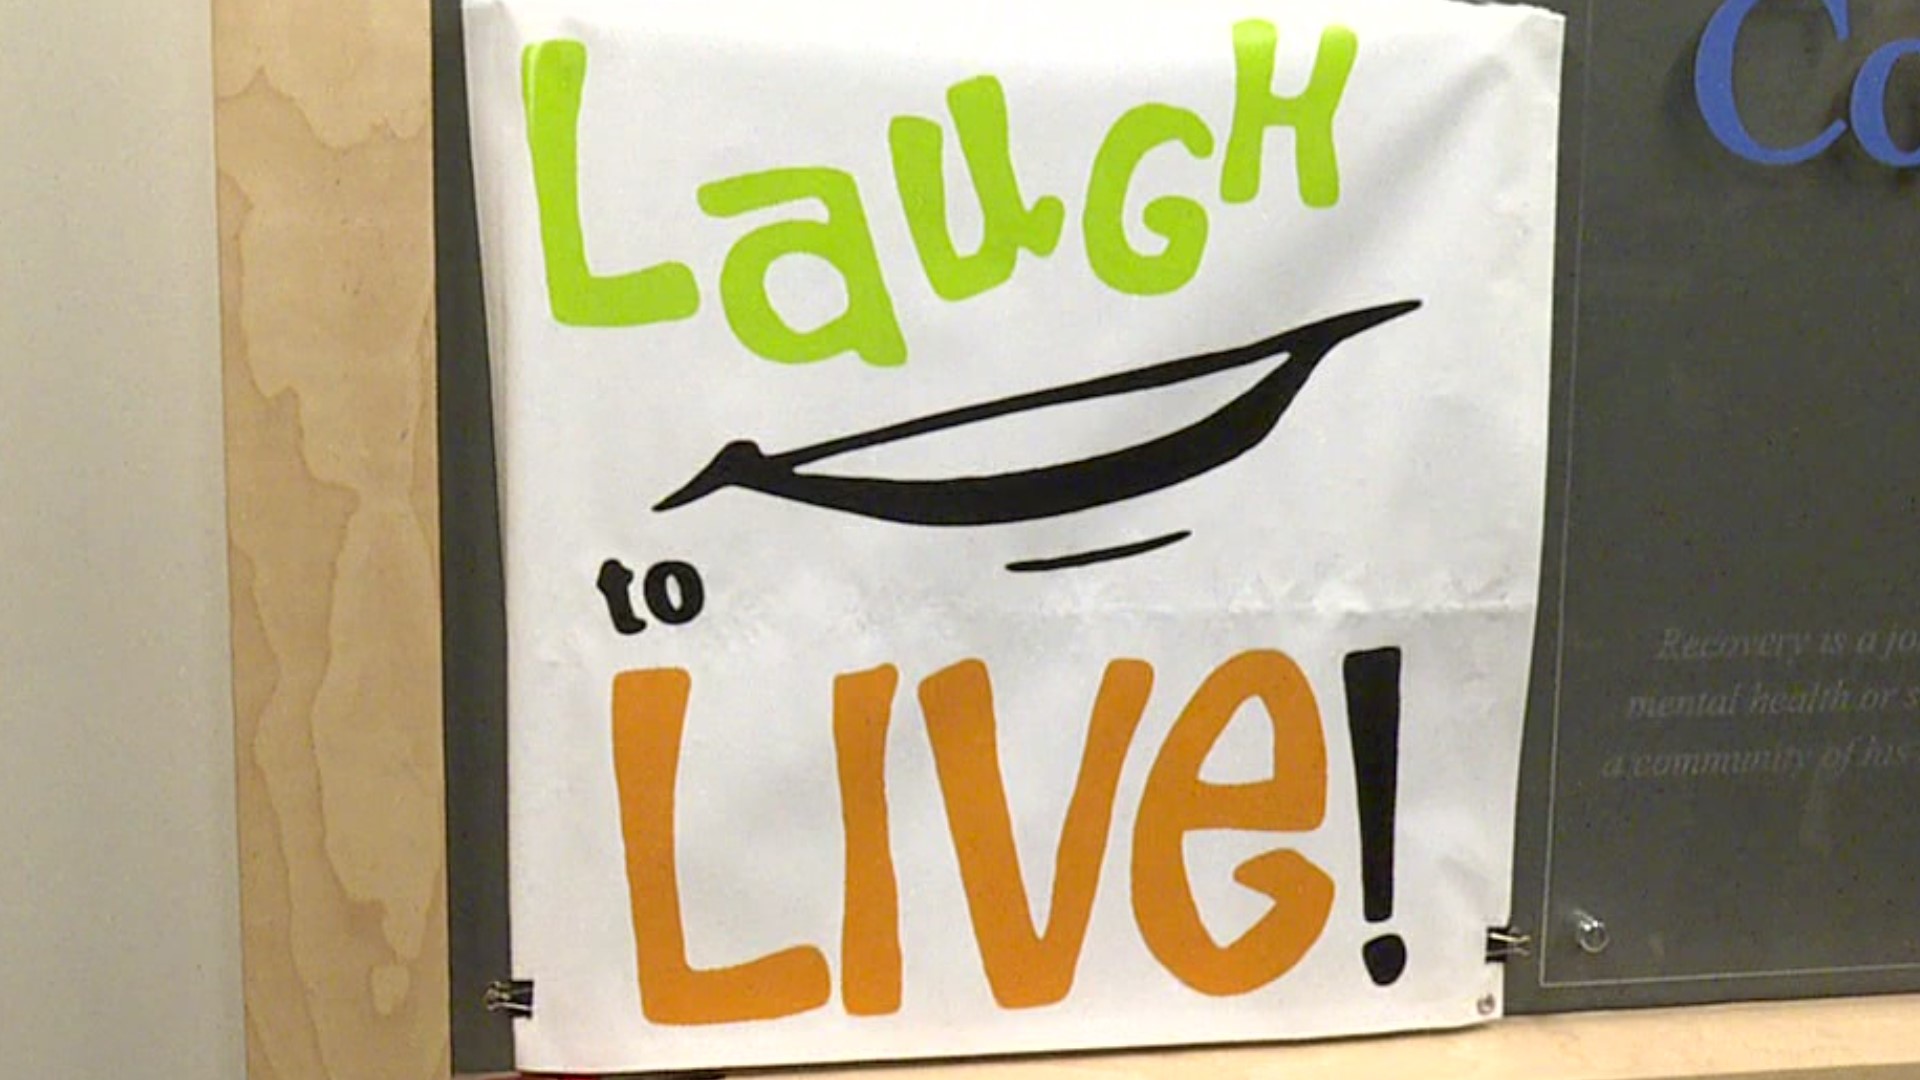 They say laughter is the best medicine. That's the theory behind a comedy show fundraiser for a national mental health awareness organization.